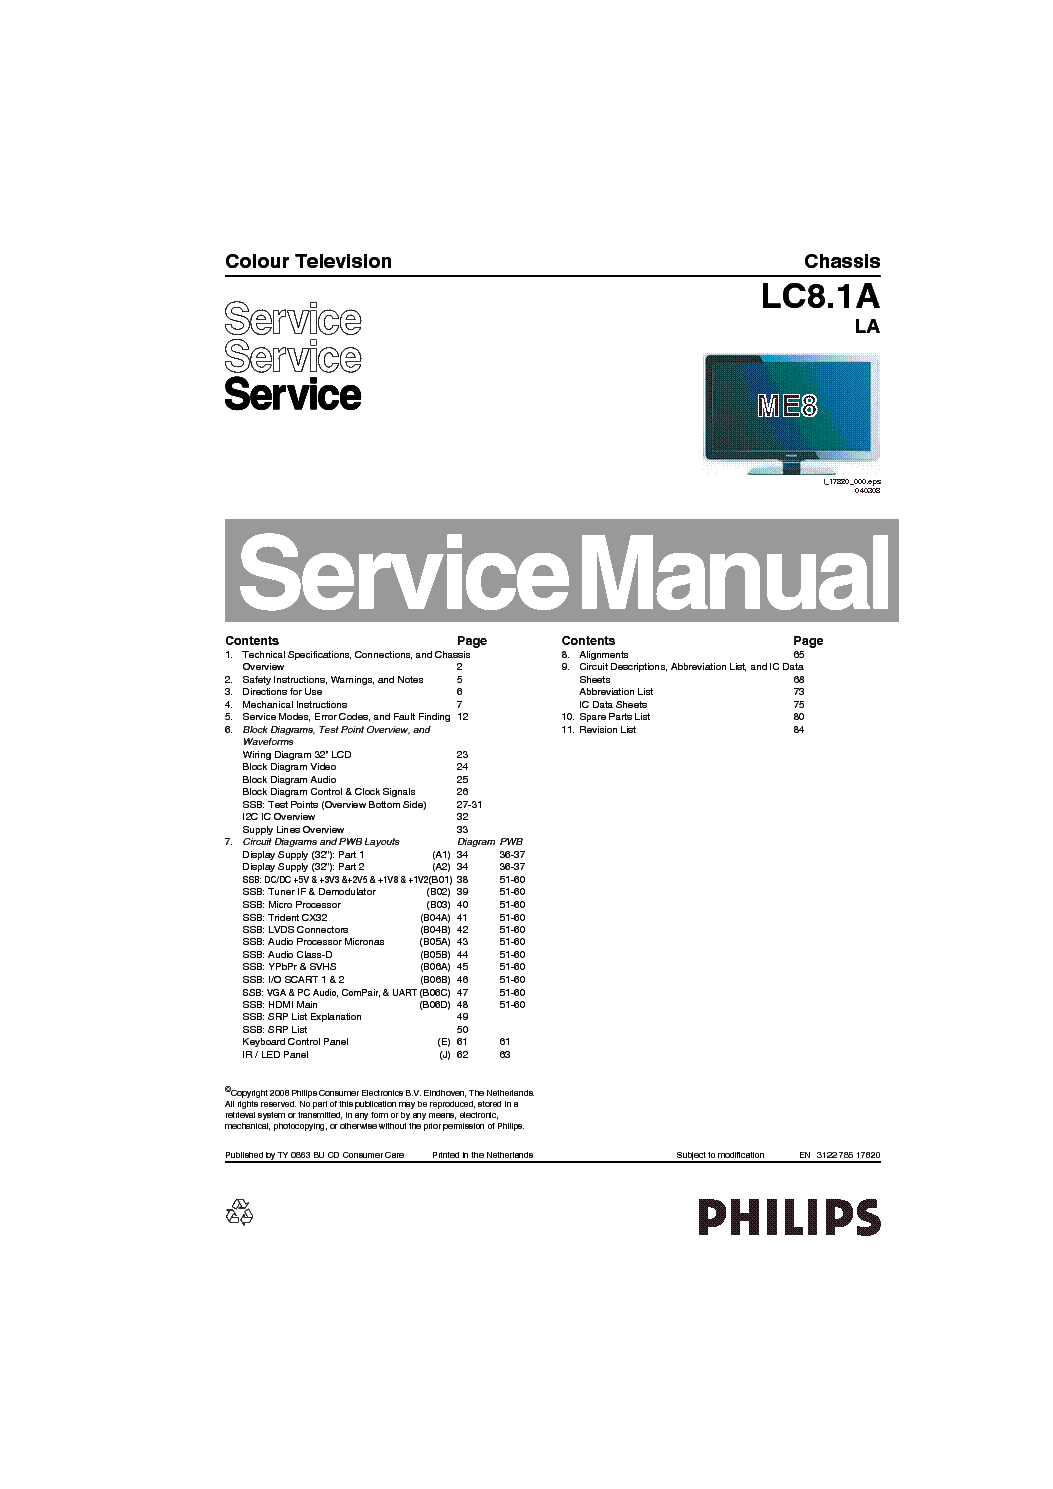 PHILIPS LC8.1ALA 312278517820 service manual (1st page)